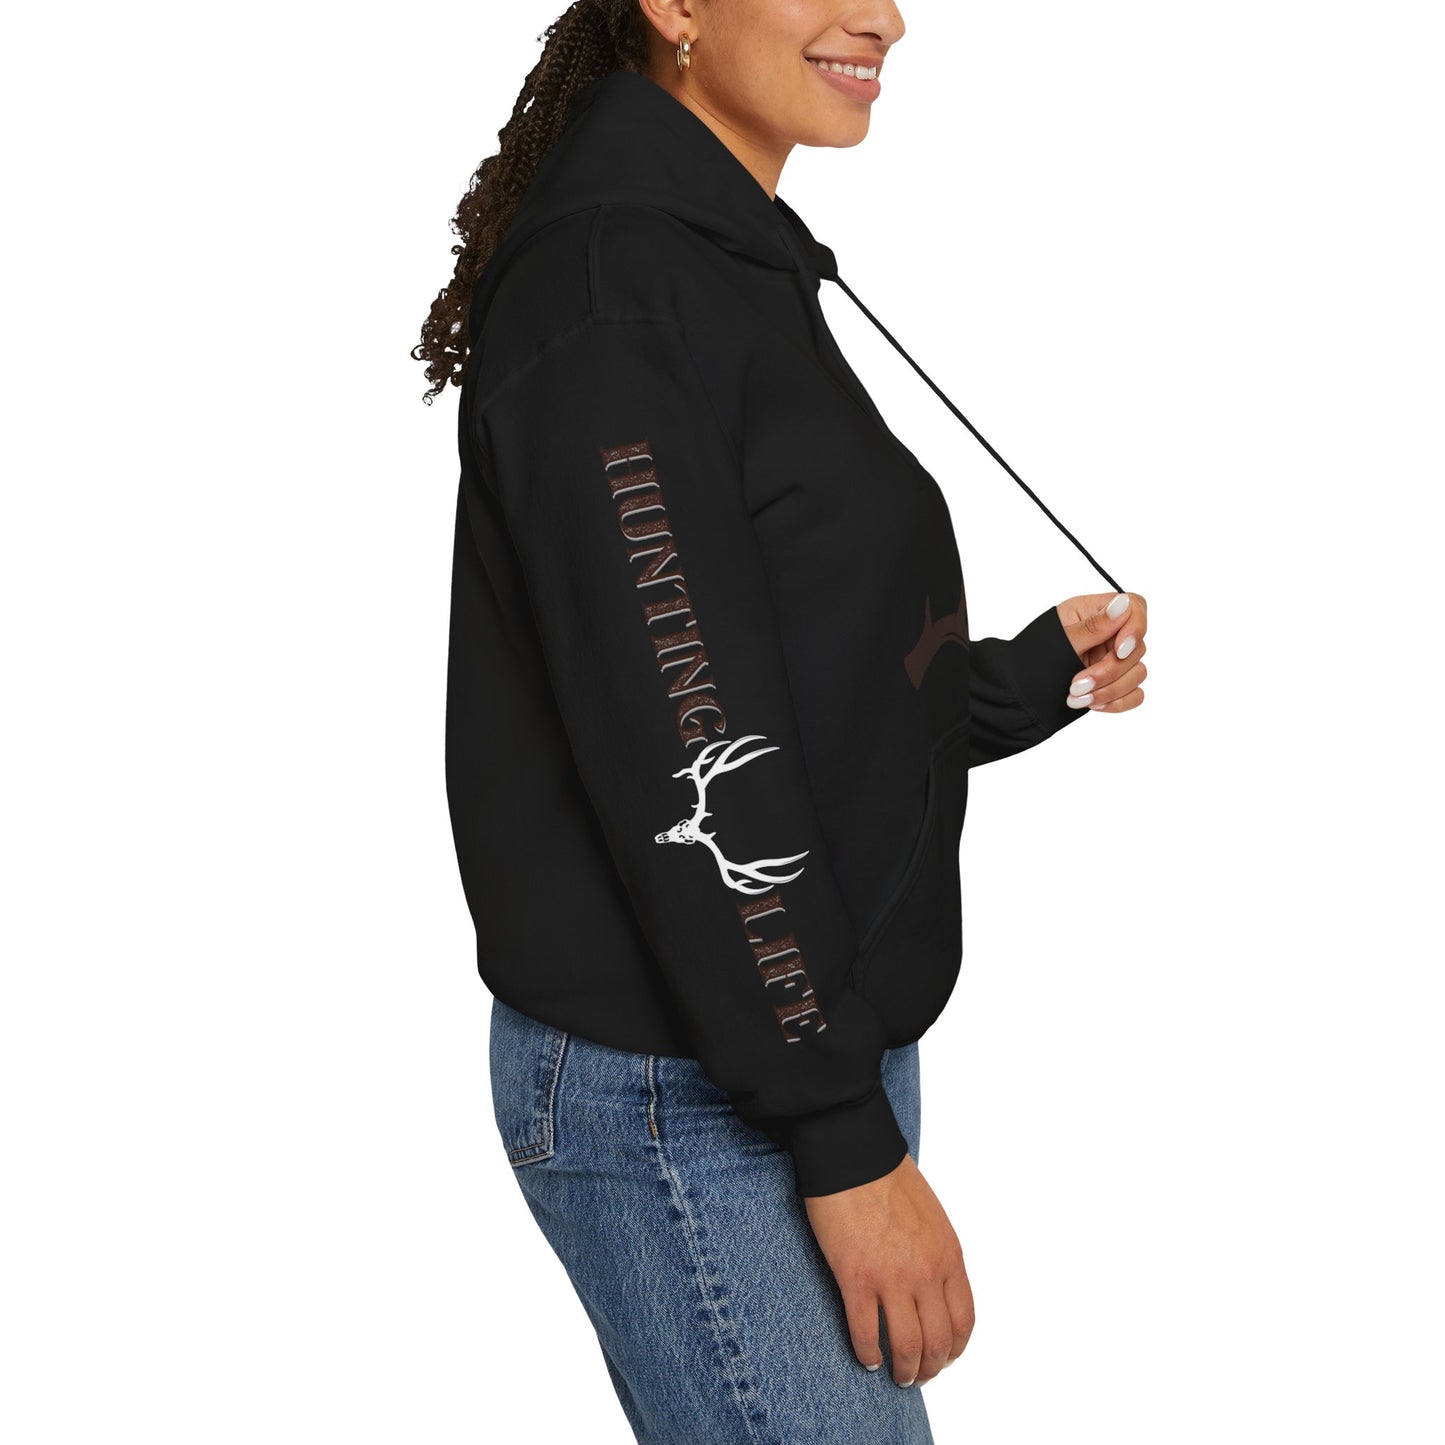 The Muley Shed Hoodie